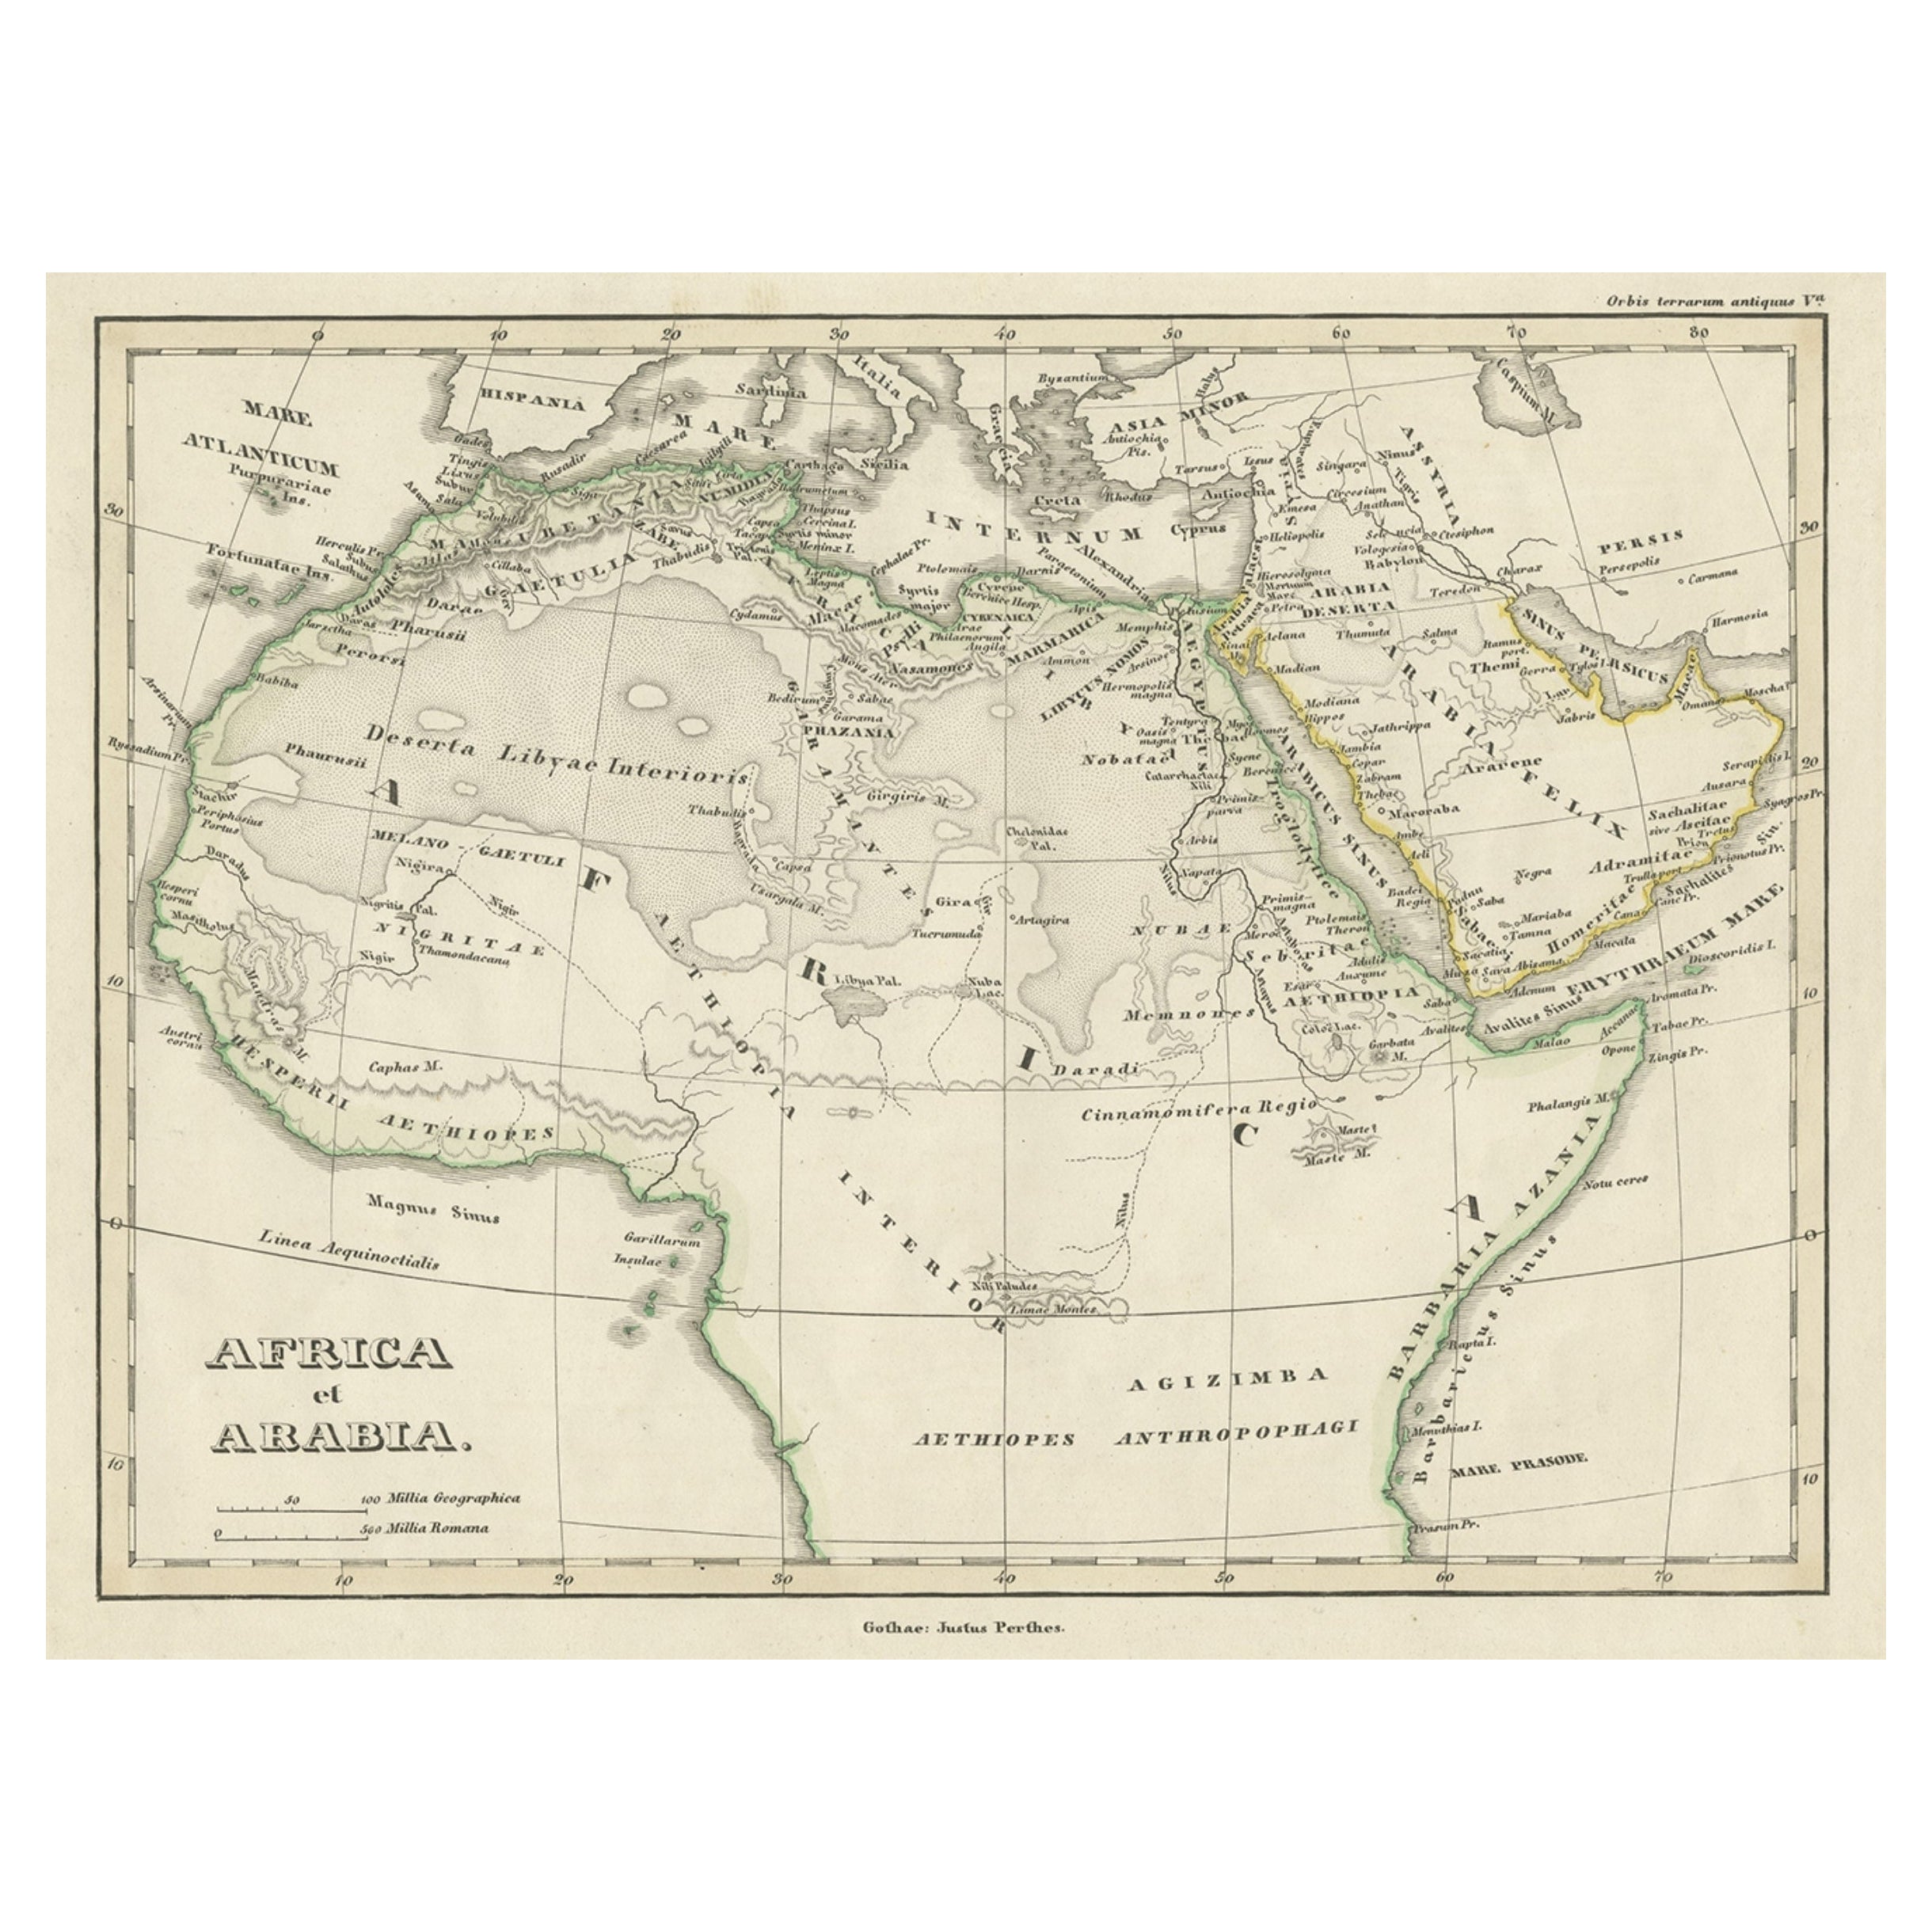 Old Original Map of Africa and Arabia, 1848